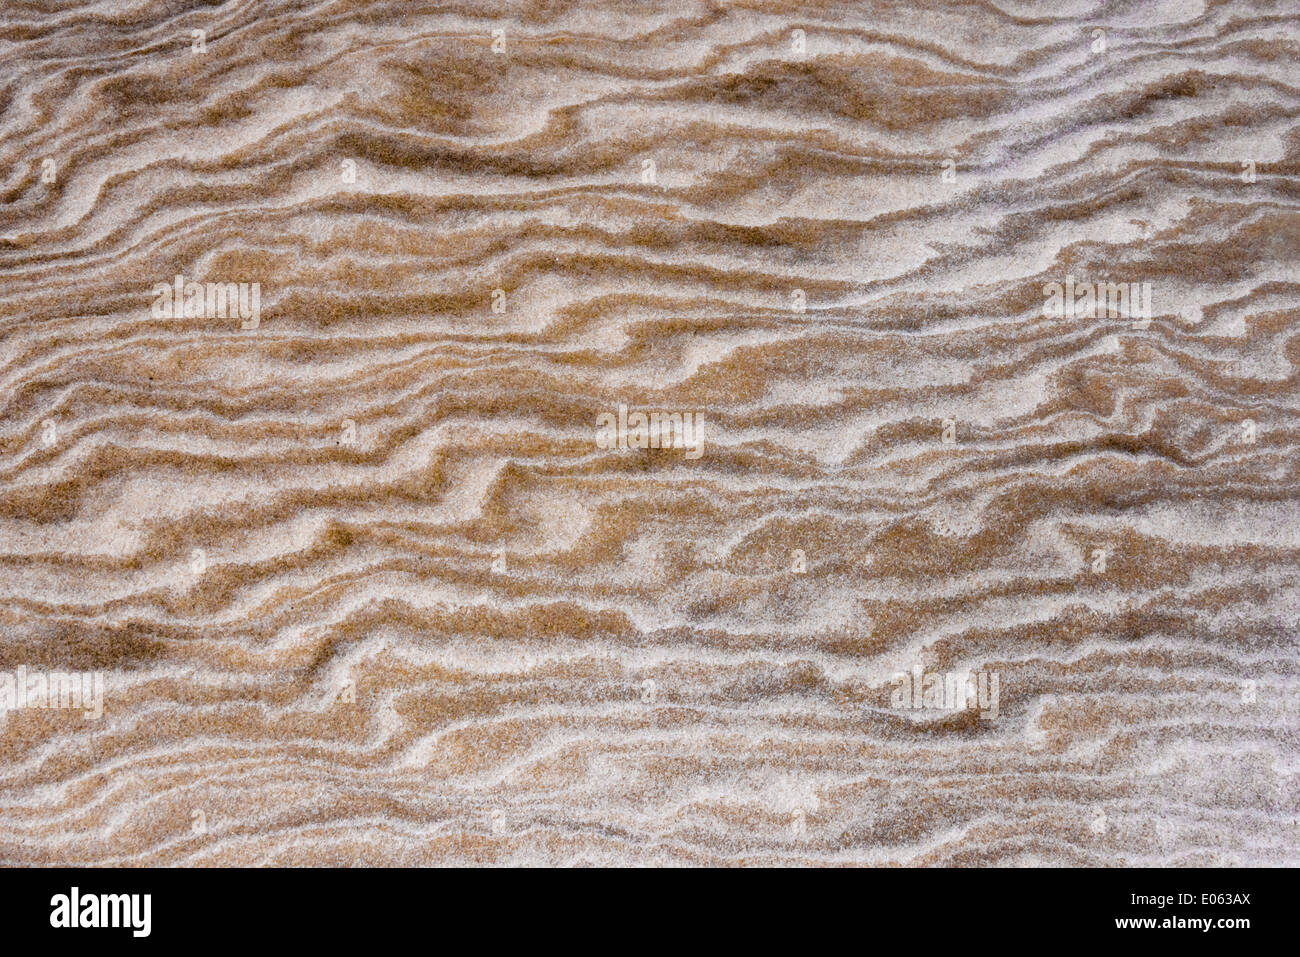 Pattern washed out by rain on sand dune resembling painting, Lencois Maranheinses National Park, Maranhao State, Brazil Stock Photo